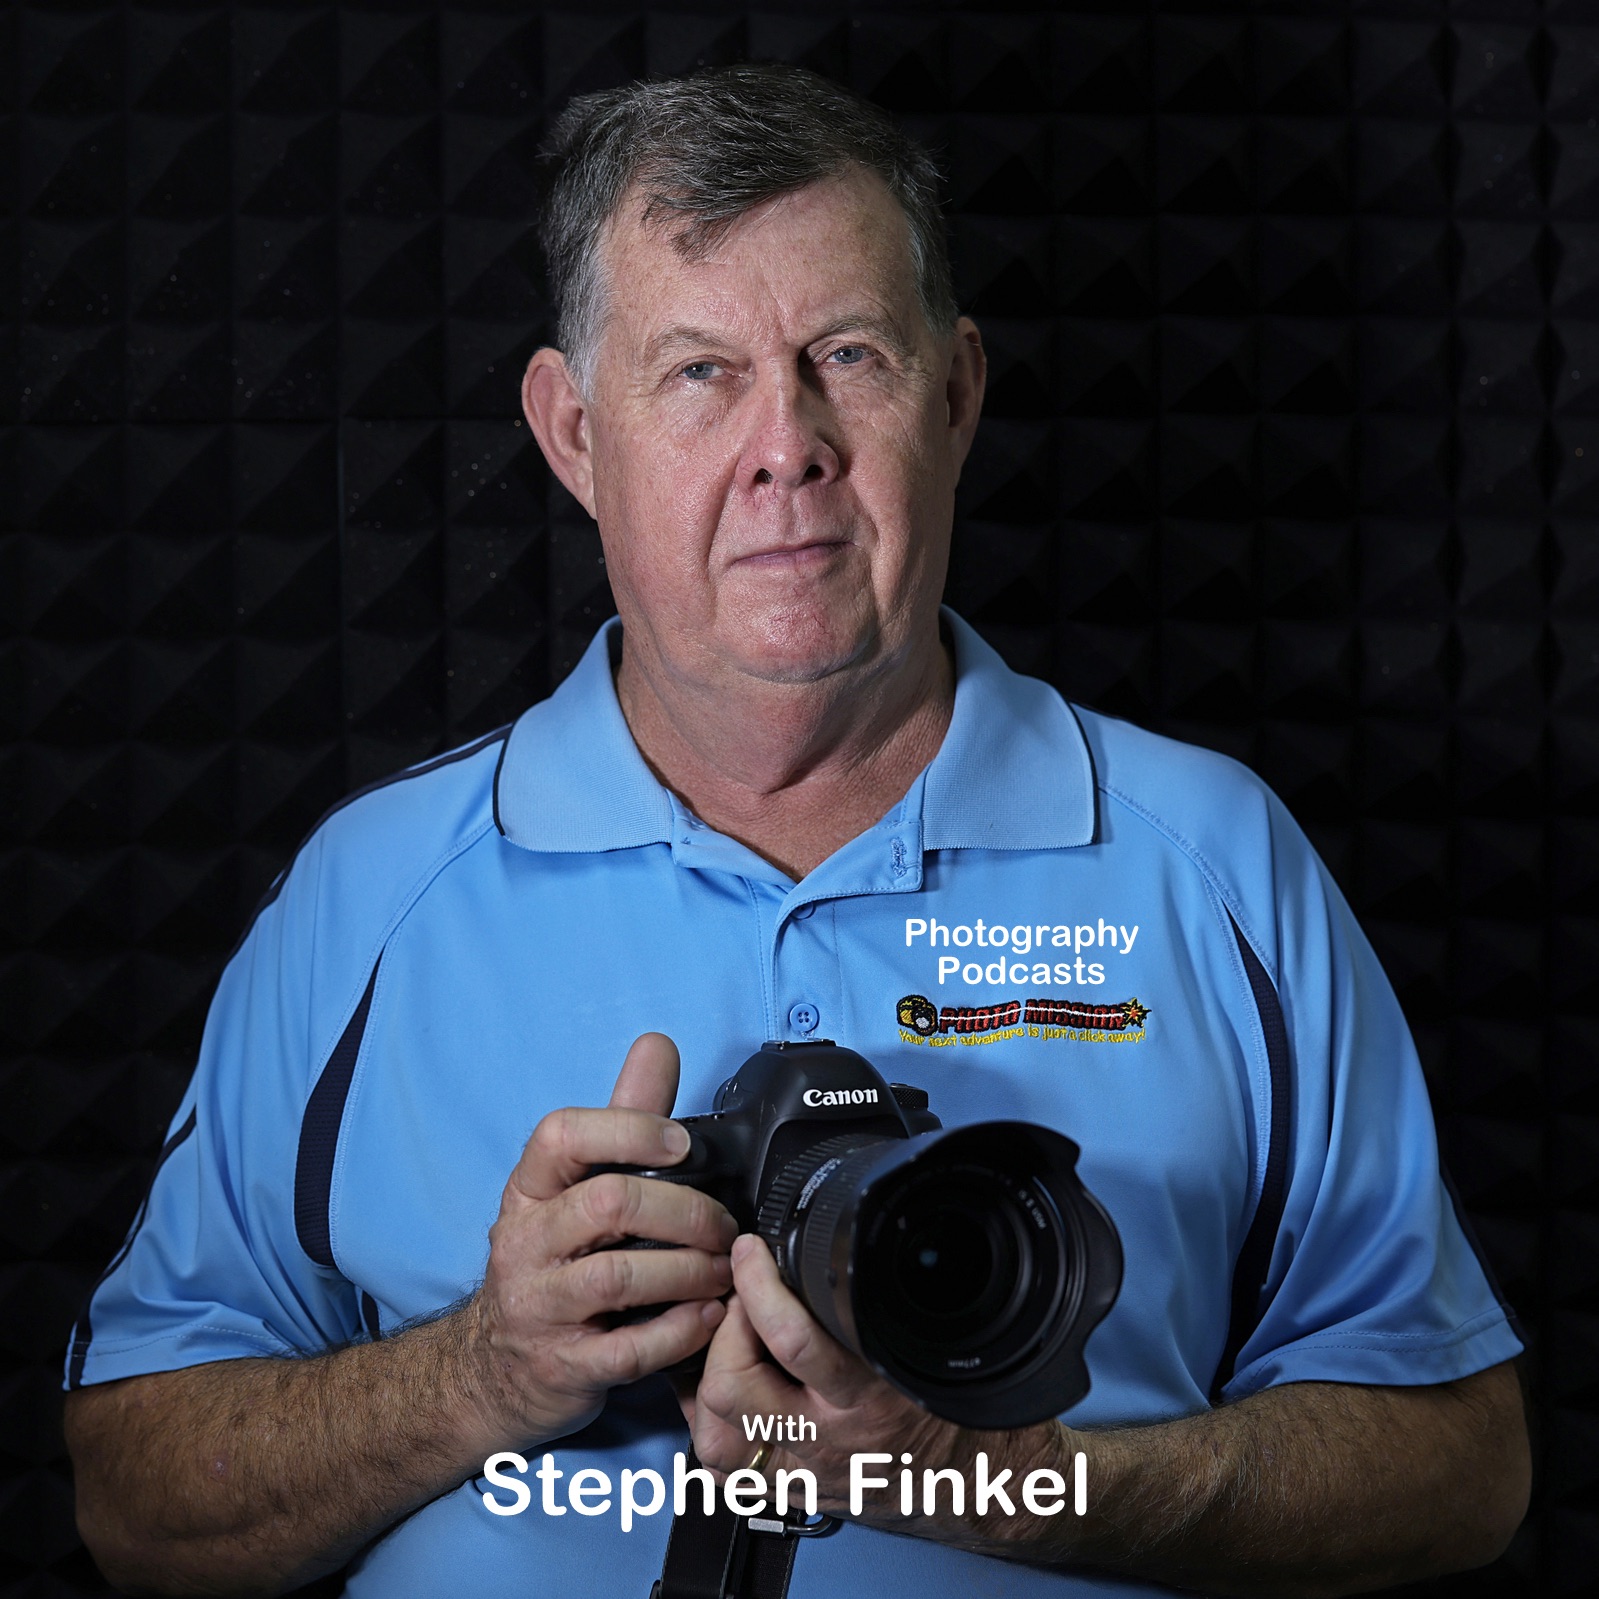 Focus: Photography Podcast with Stephen Finkel Flying Solo Being a Trail Blazer in Photography